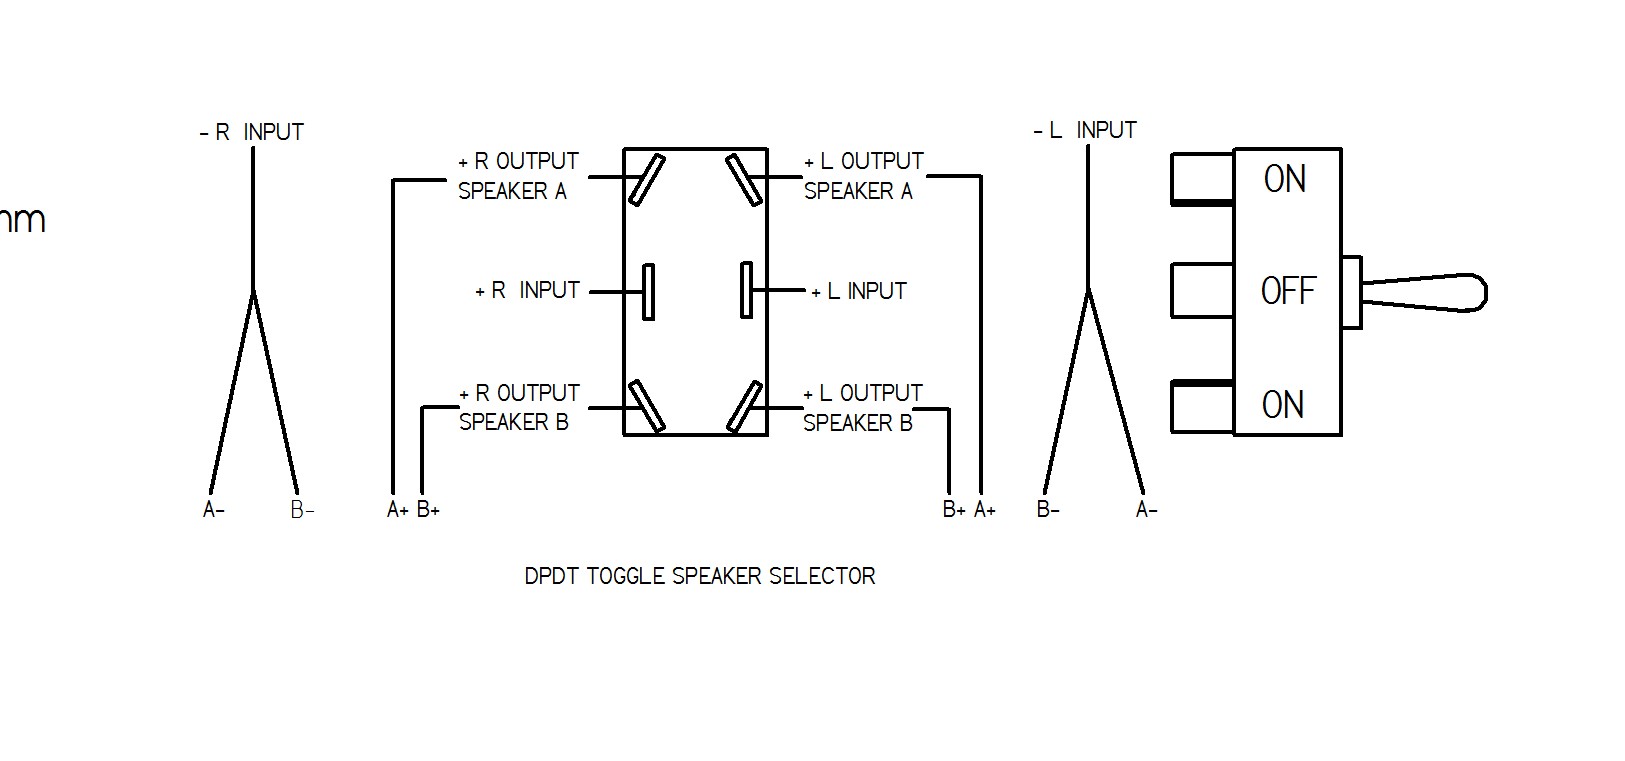 566683d1472152641-long-speakers-cables-selection-box-parallel86-speaker-selector.jpg